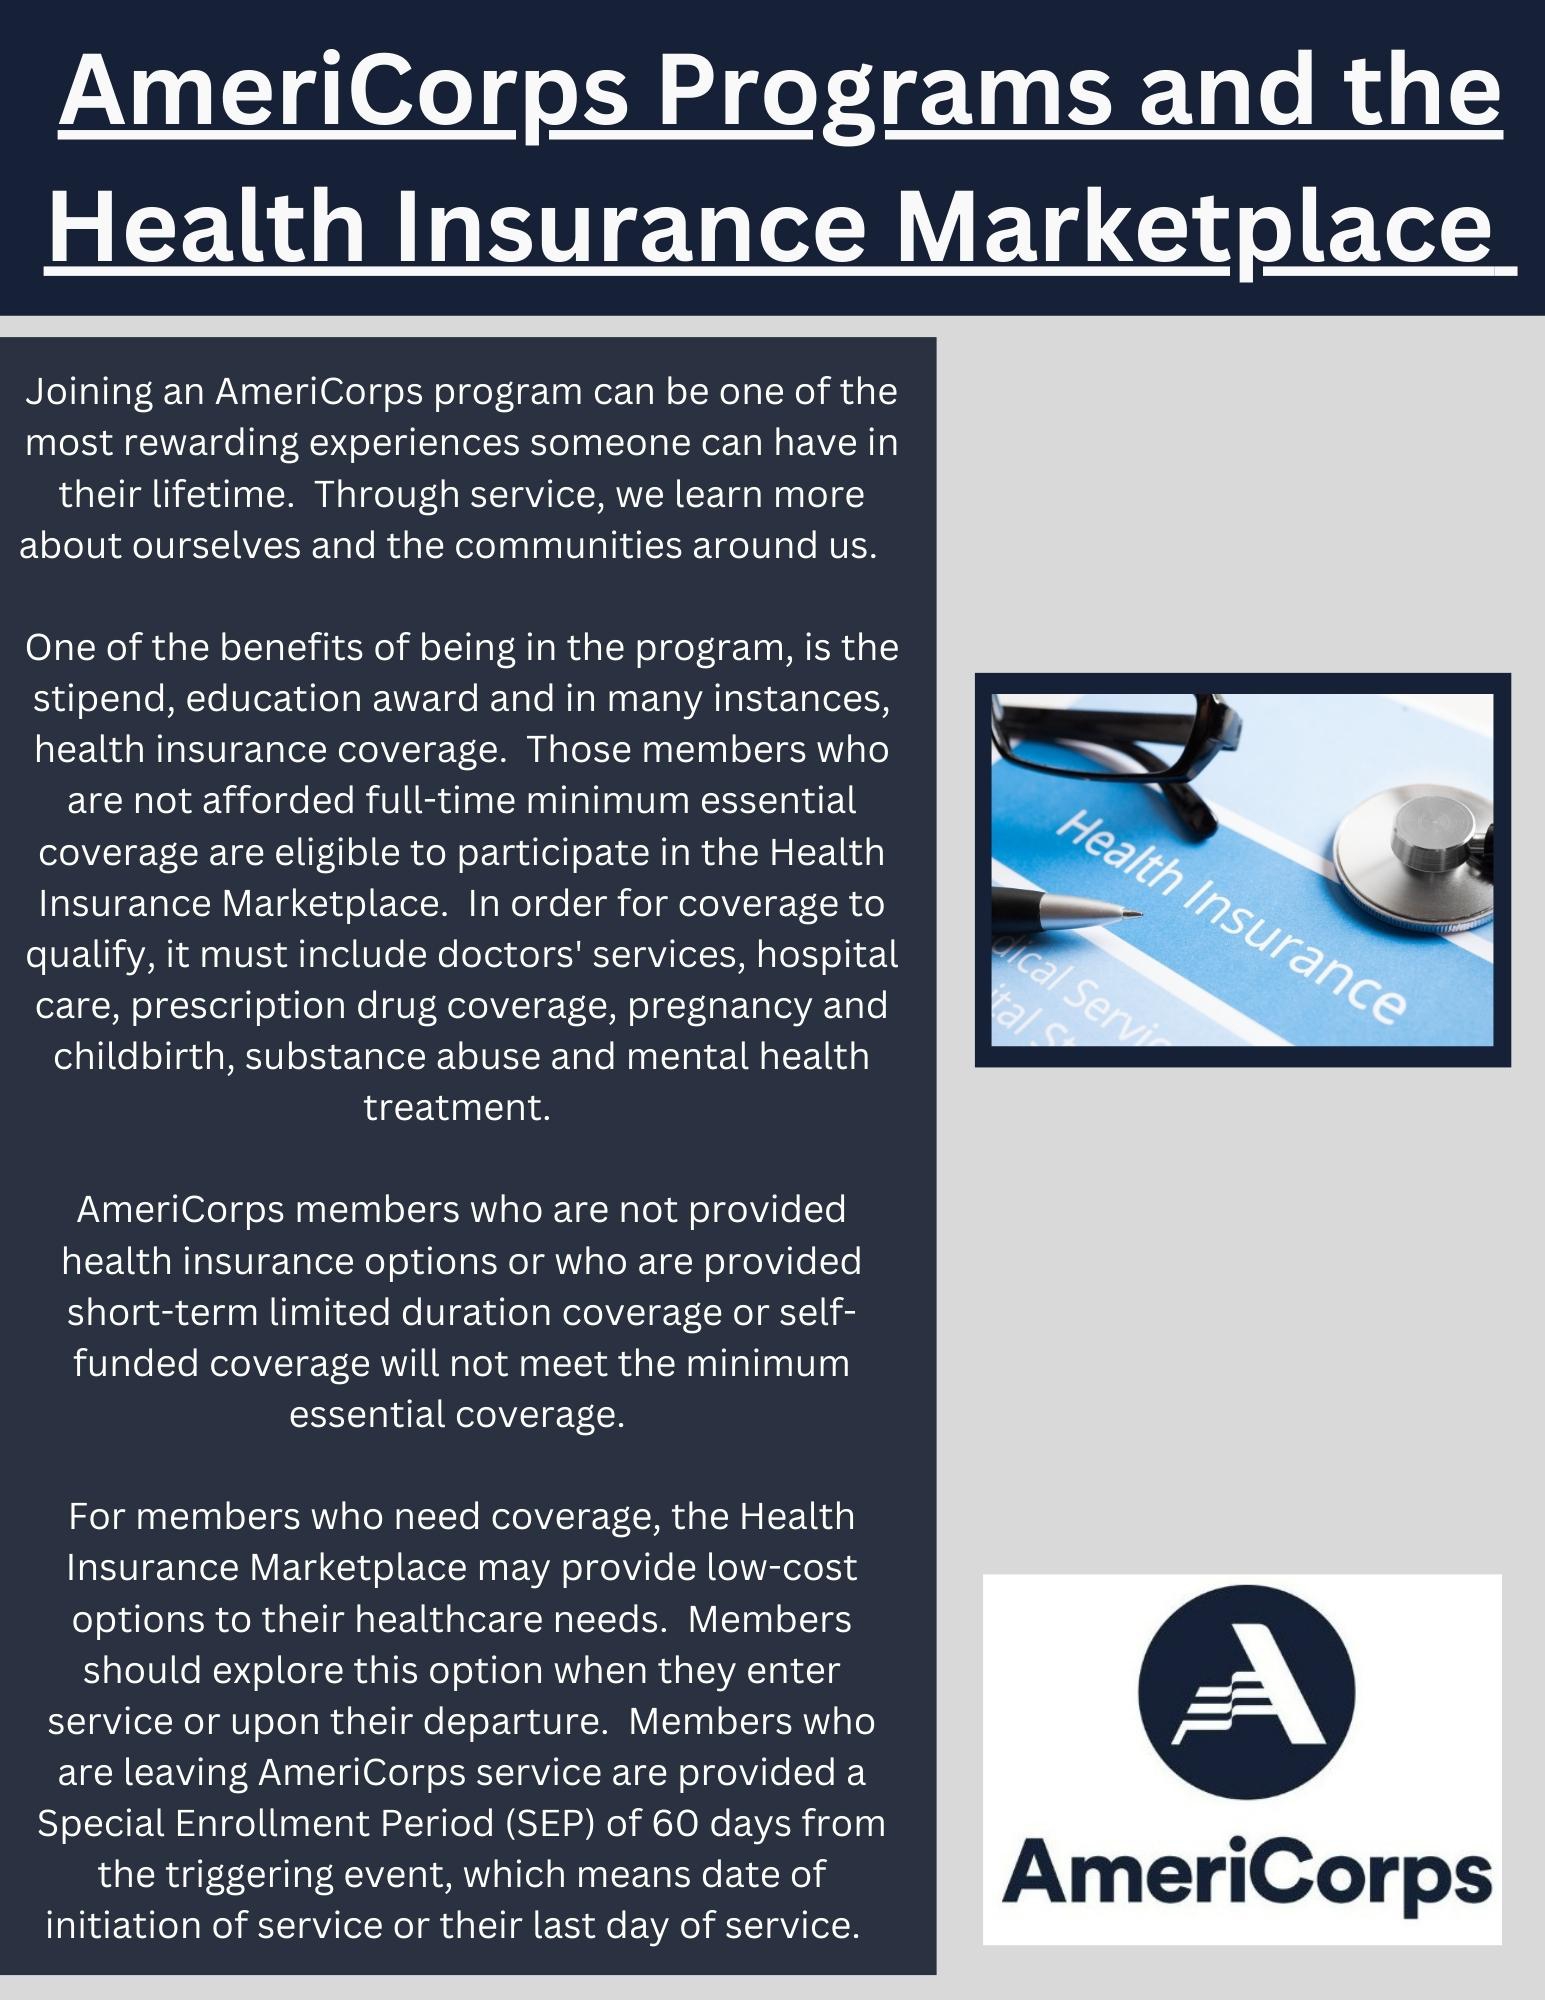 AmeriCorps Programs and the Health Insurance Marketplace  - 1